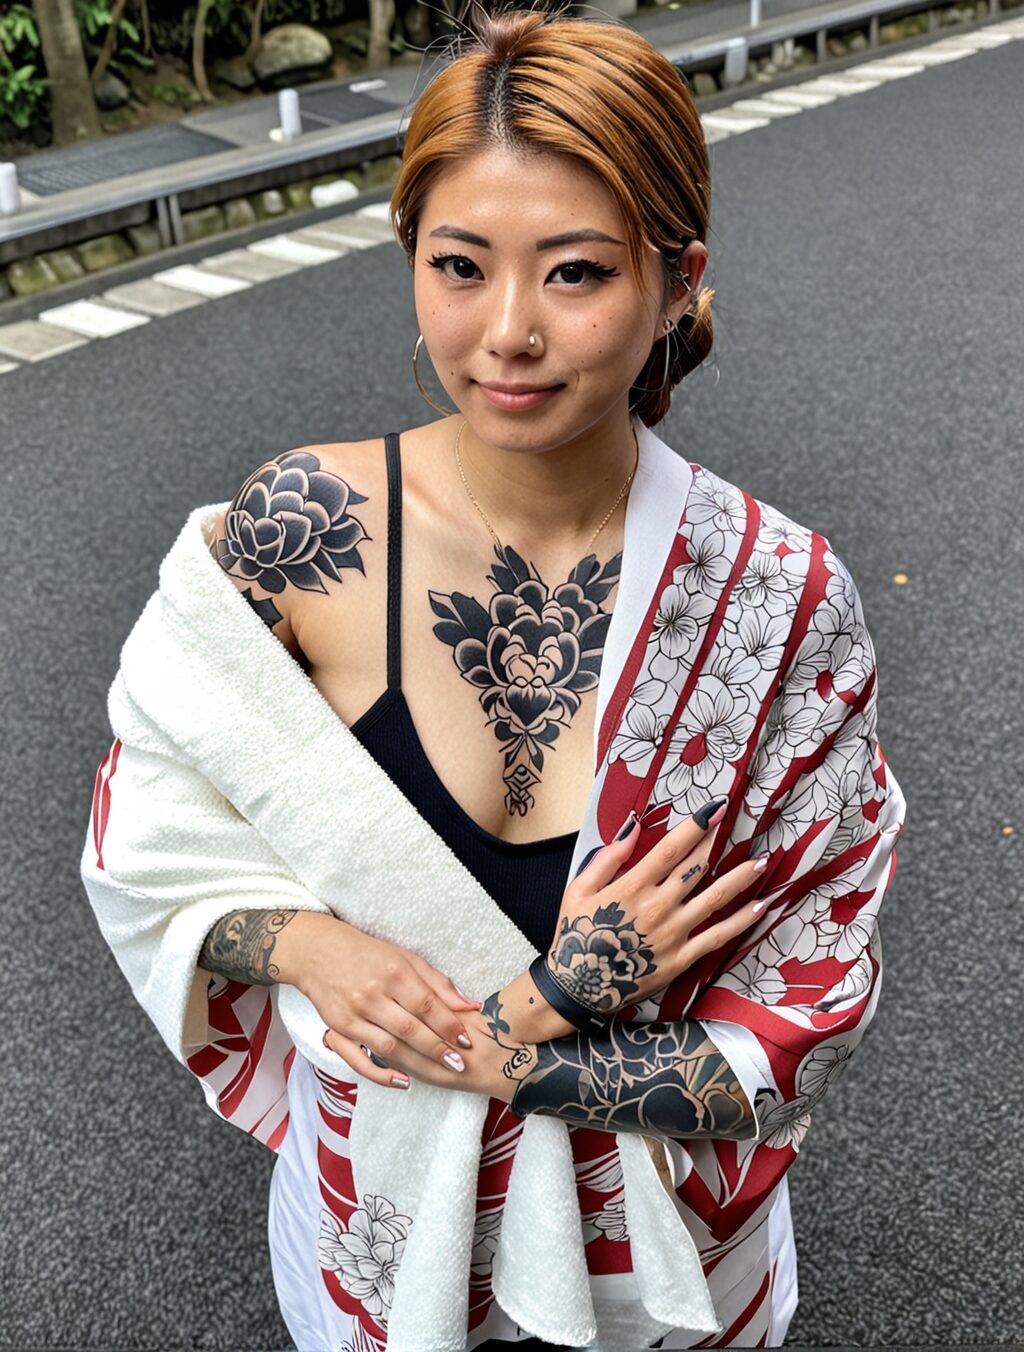 traveling to japan with tattoos